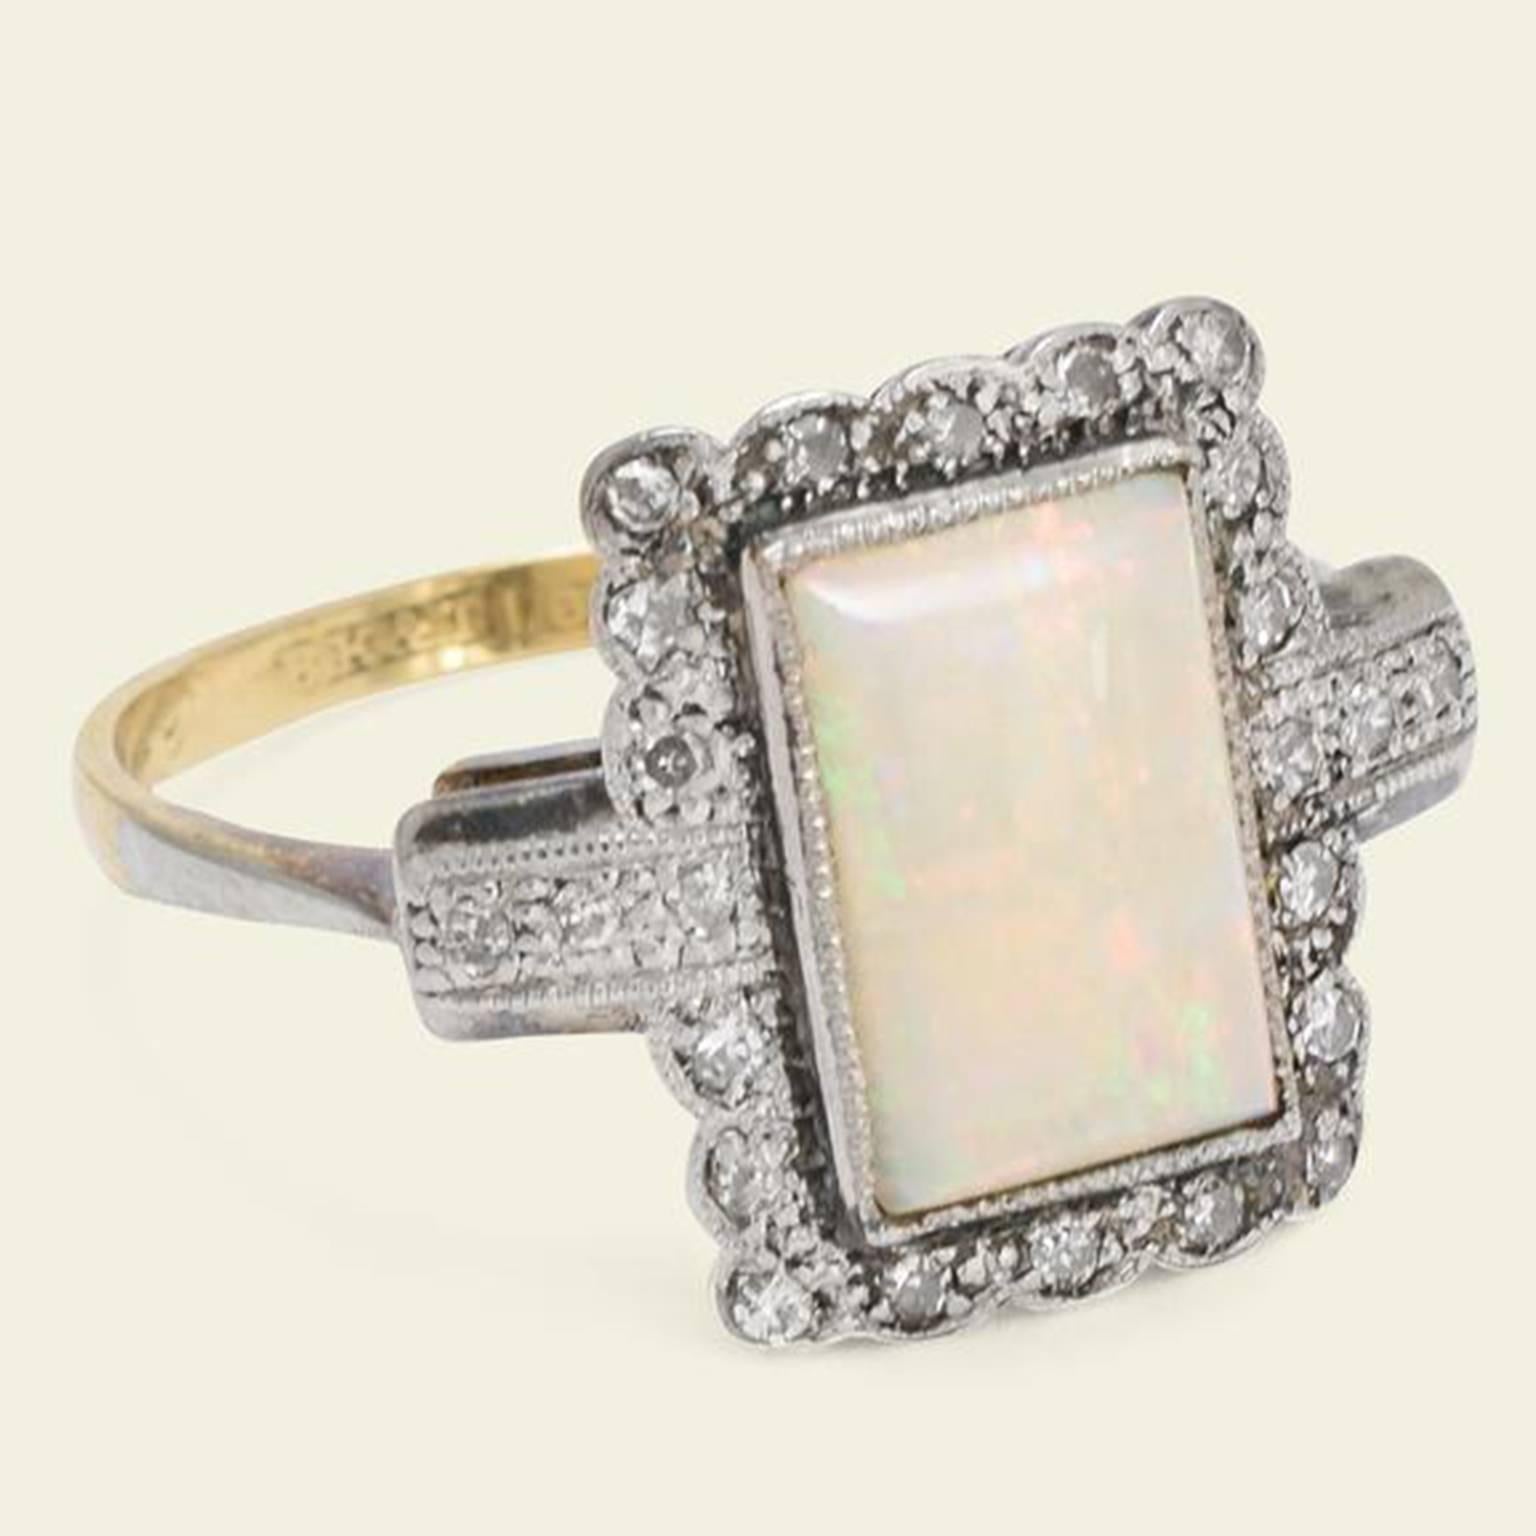 The opal has fallen in and out of favor throughout history.  It went through a particularly tough time in the early and middle 1800's, when a novel by Sir Walter Scott cursed the opal as a bad-luck talisman.  In his sensationally popular book Anne